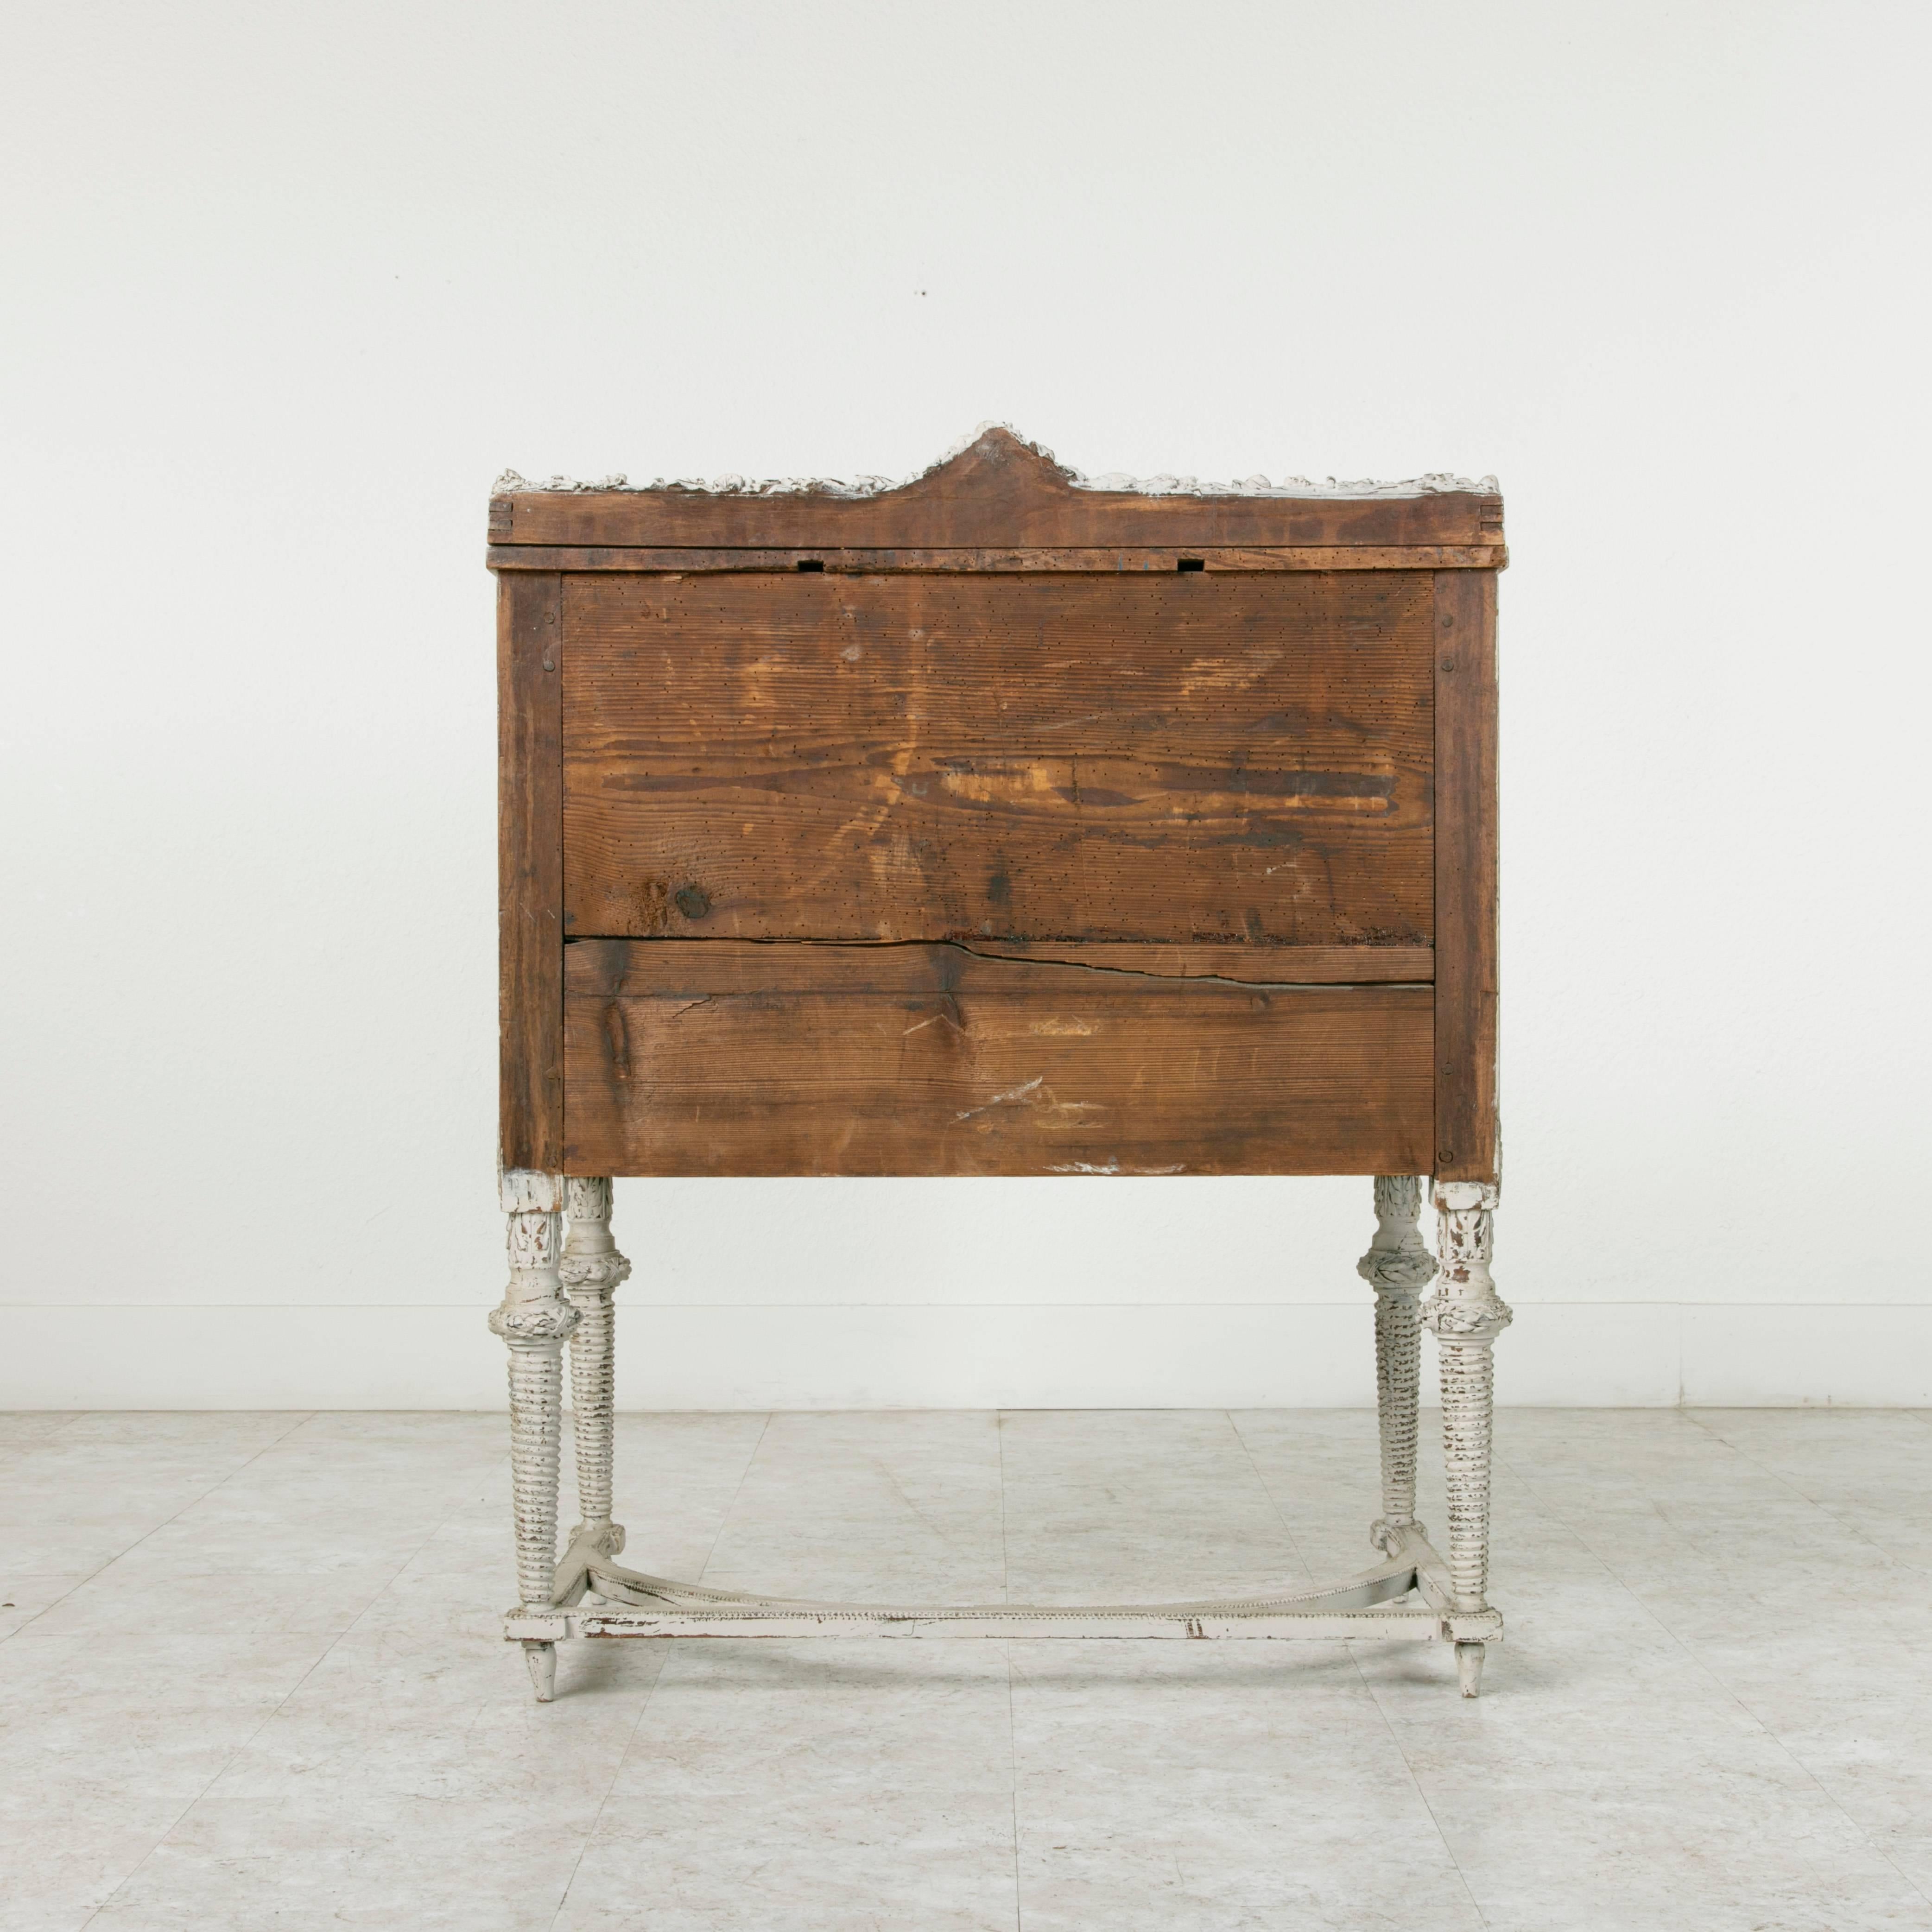 This exceptional rare Directoire period bureau de pente or writing desk features intricately executed Louis XVI motif carvings of bows, drapes, and ivy circling Directoire arrows. The drop down front opens to reveal an interior finished in leather